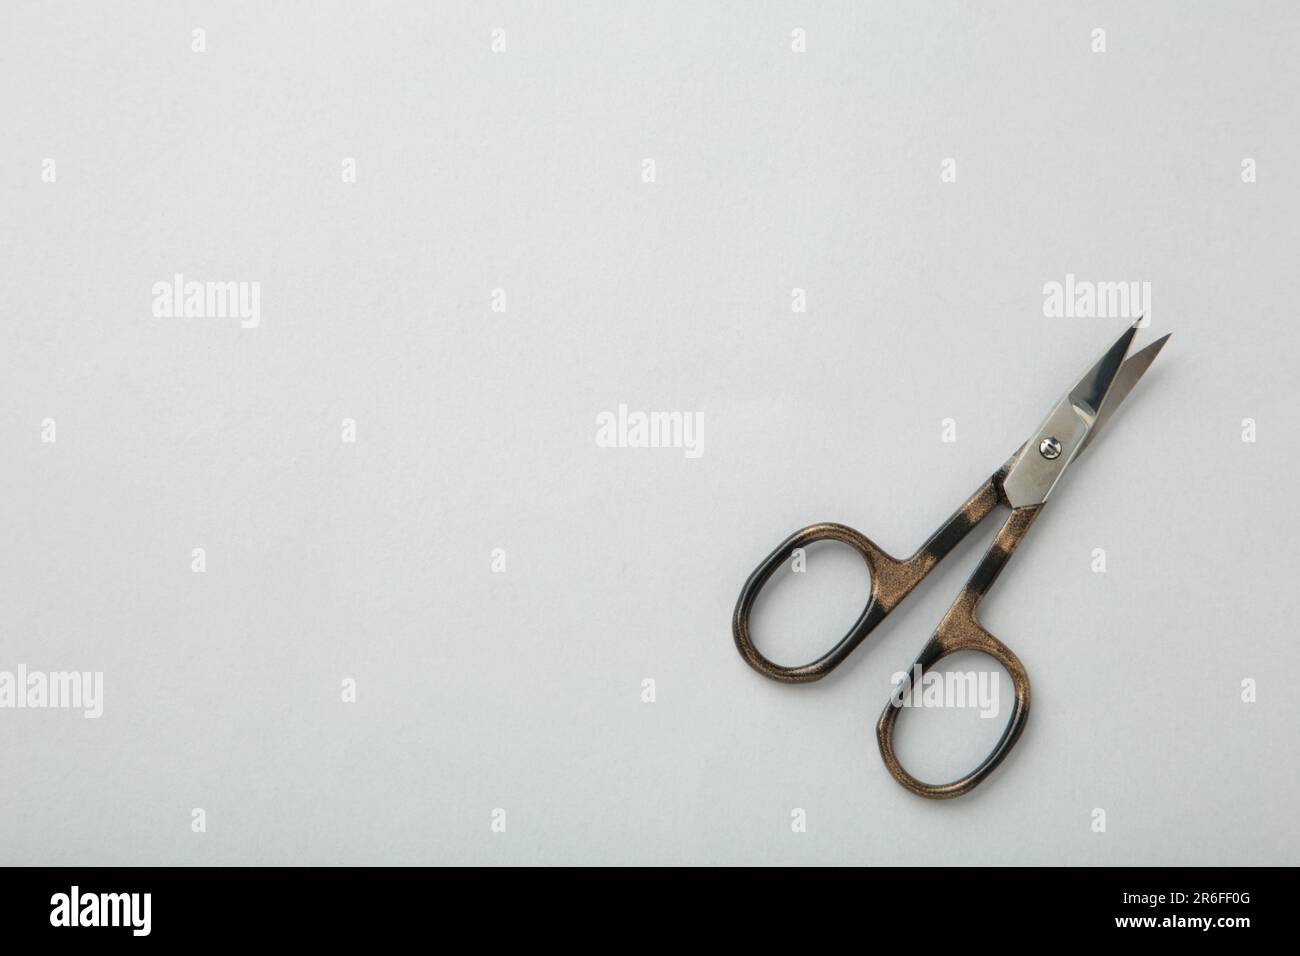 Small metal manicure scissors on grey background with copy space. Top view Stock Photo